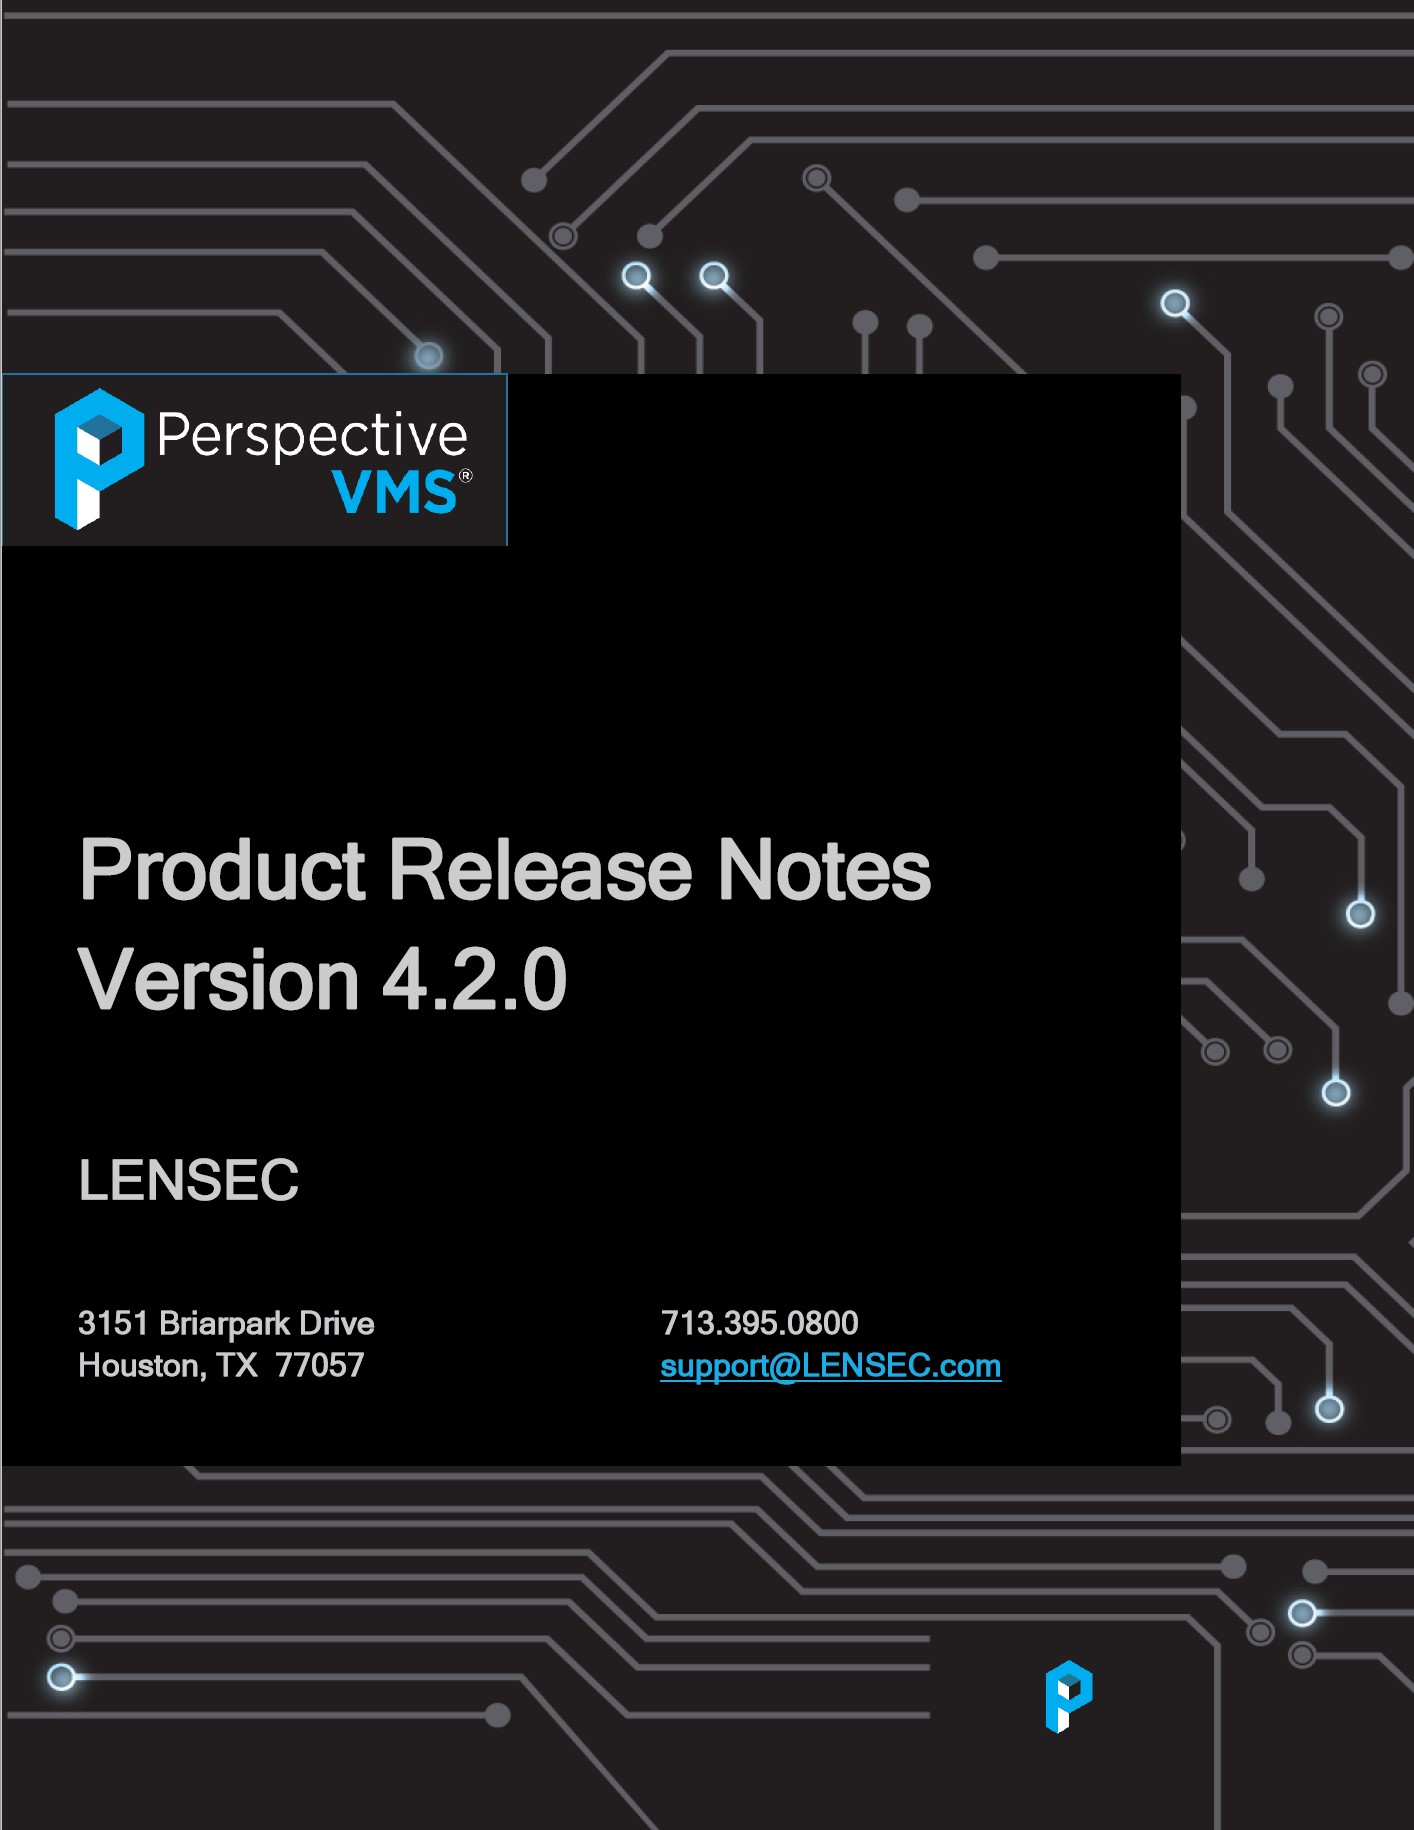 PVMS Product Release Notes v4.2.0